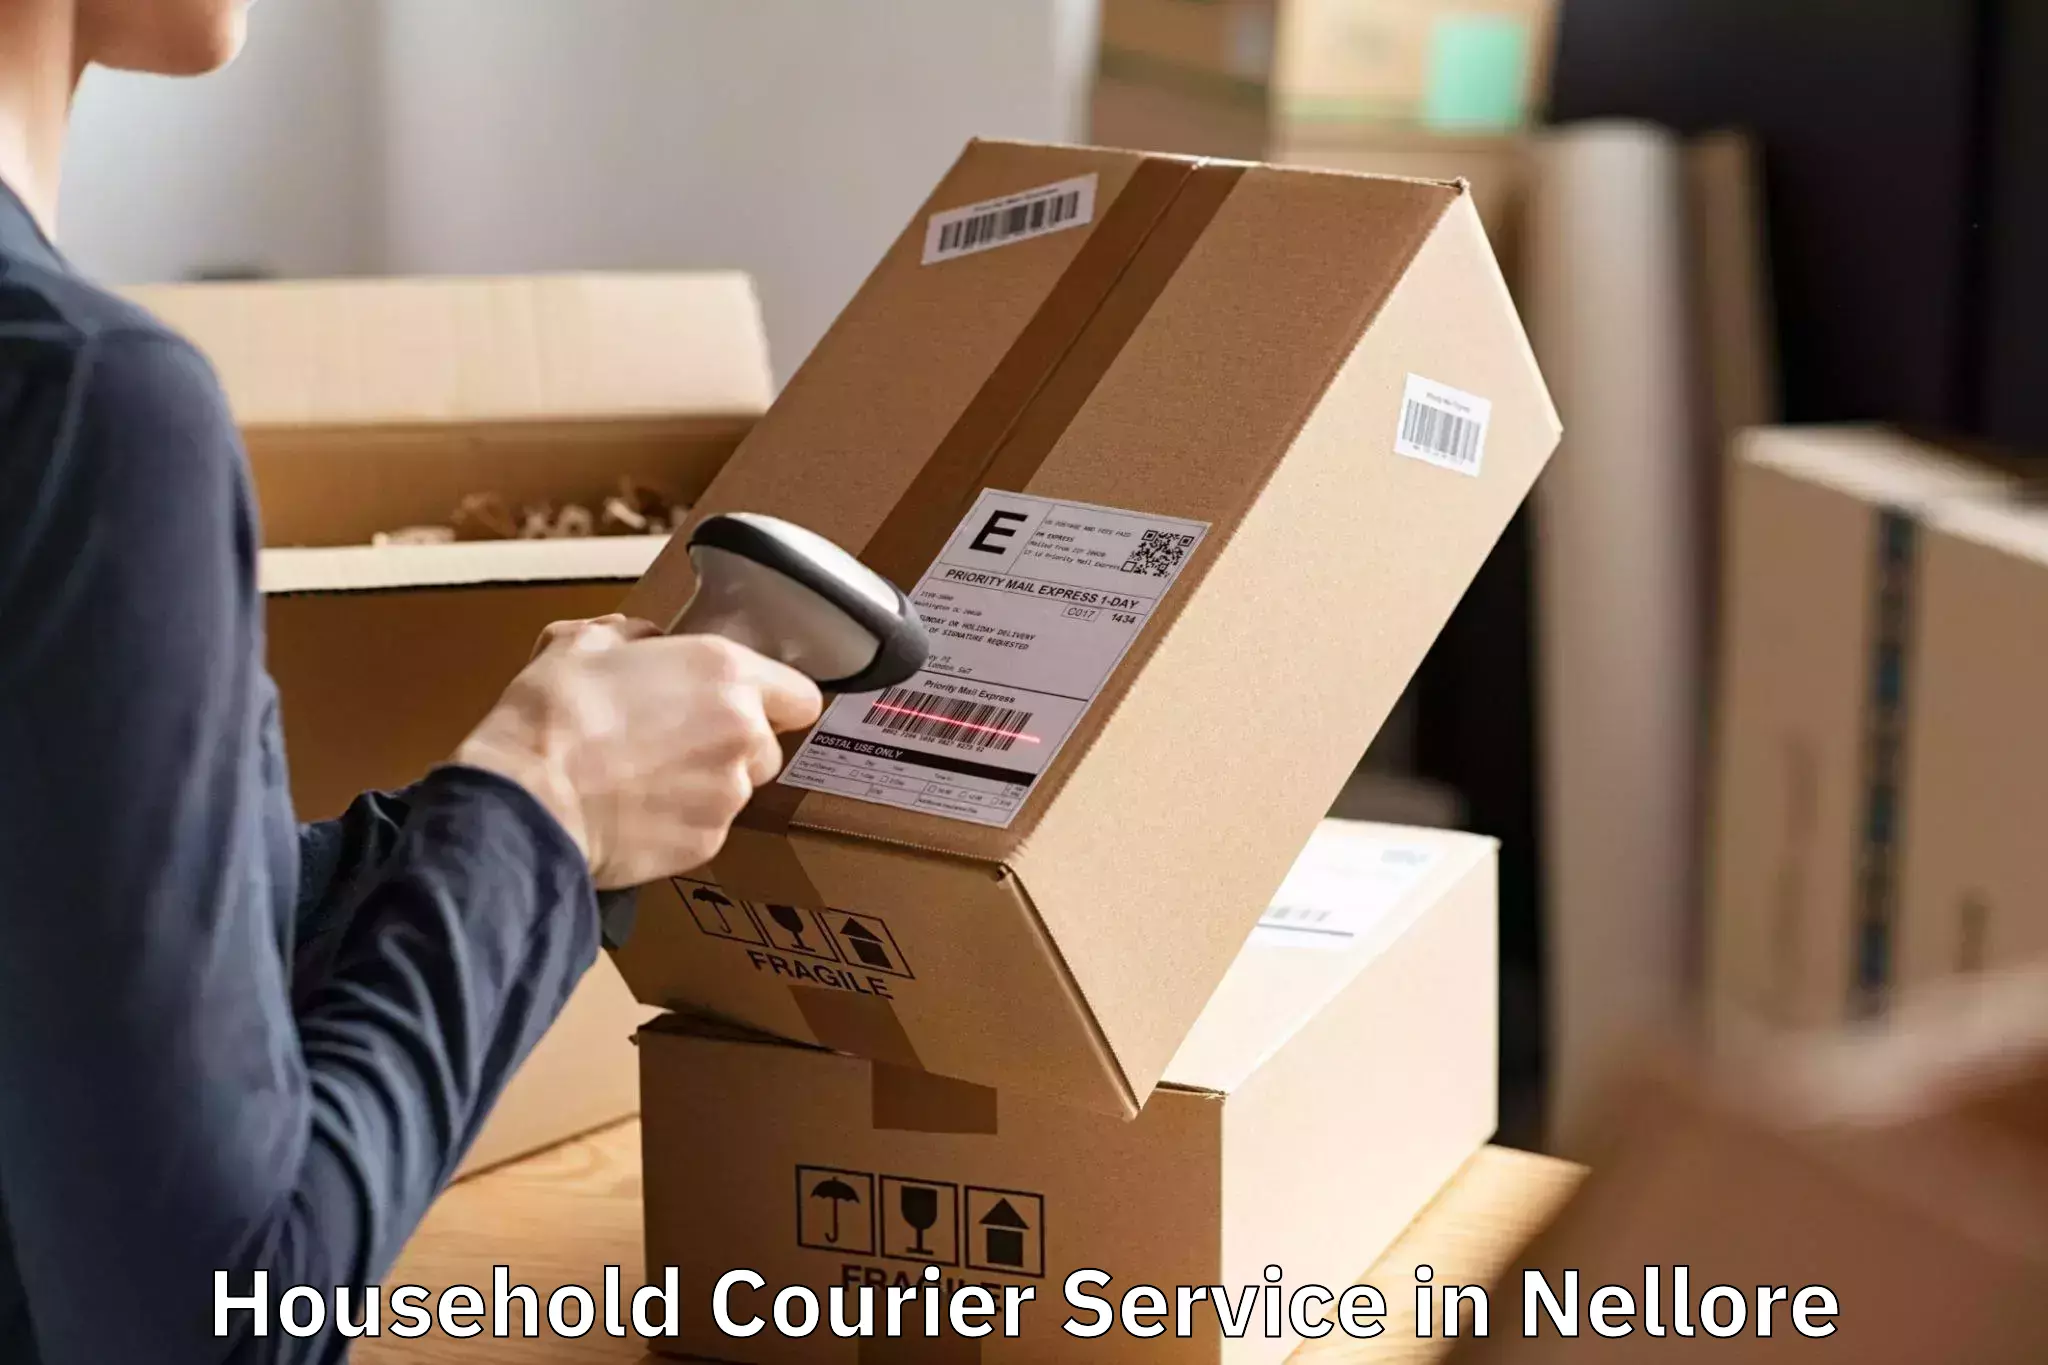 Efficient Household Courier Service in Nellore, Andhra Pradesh (AP)